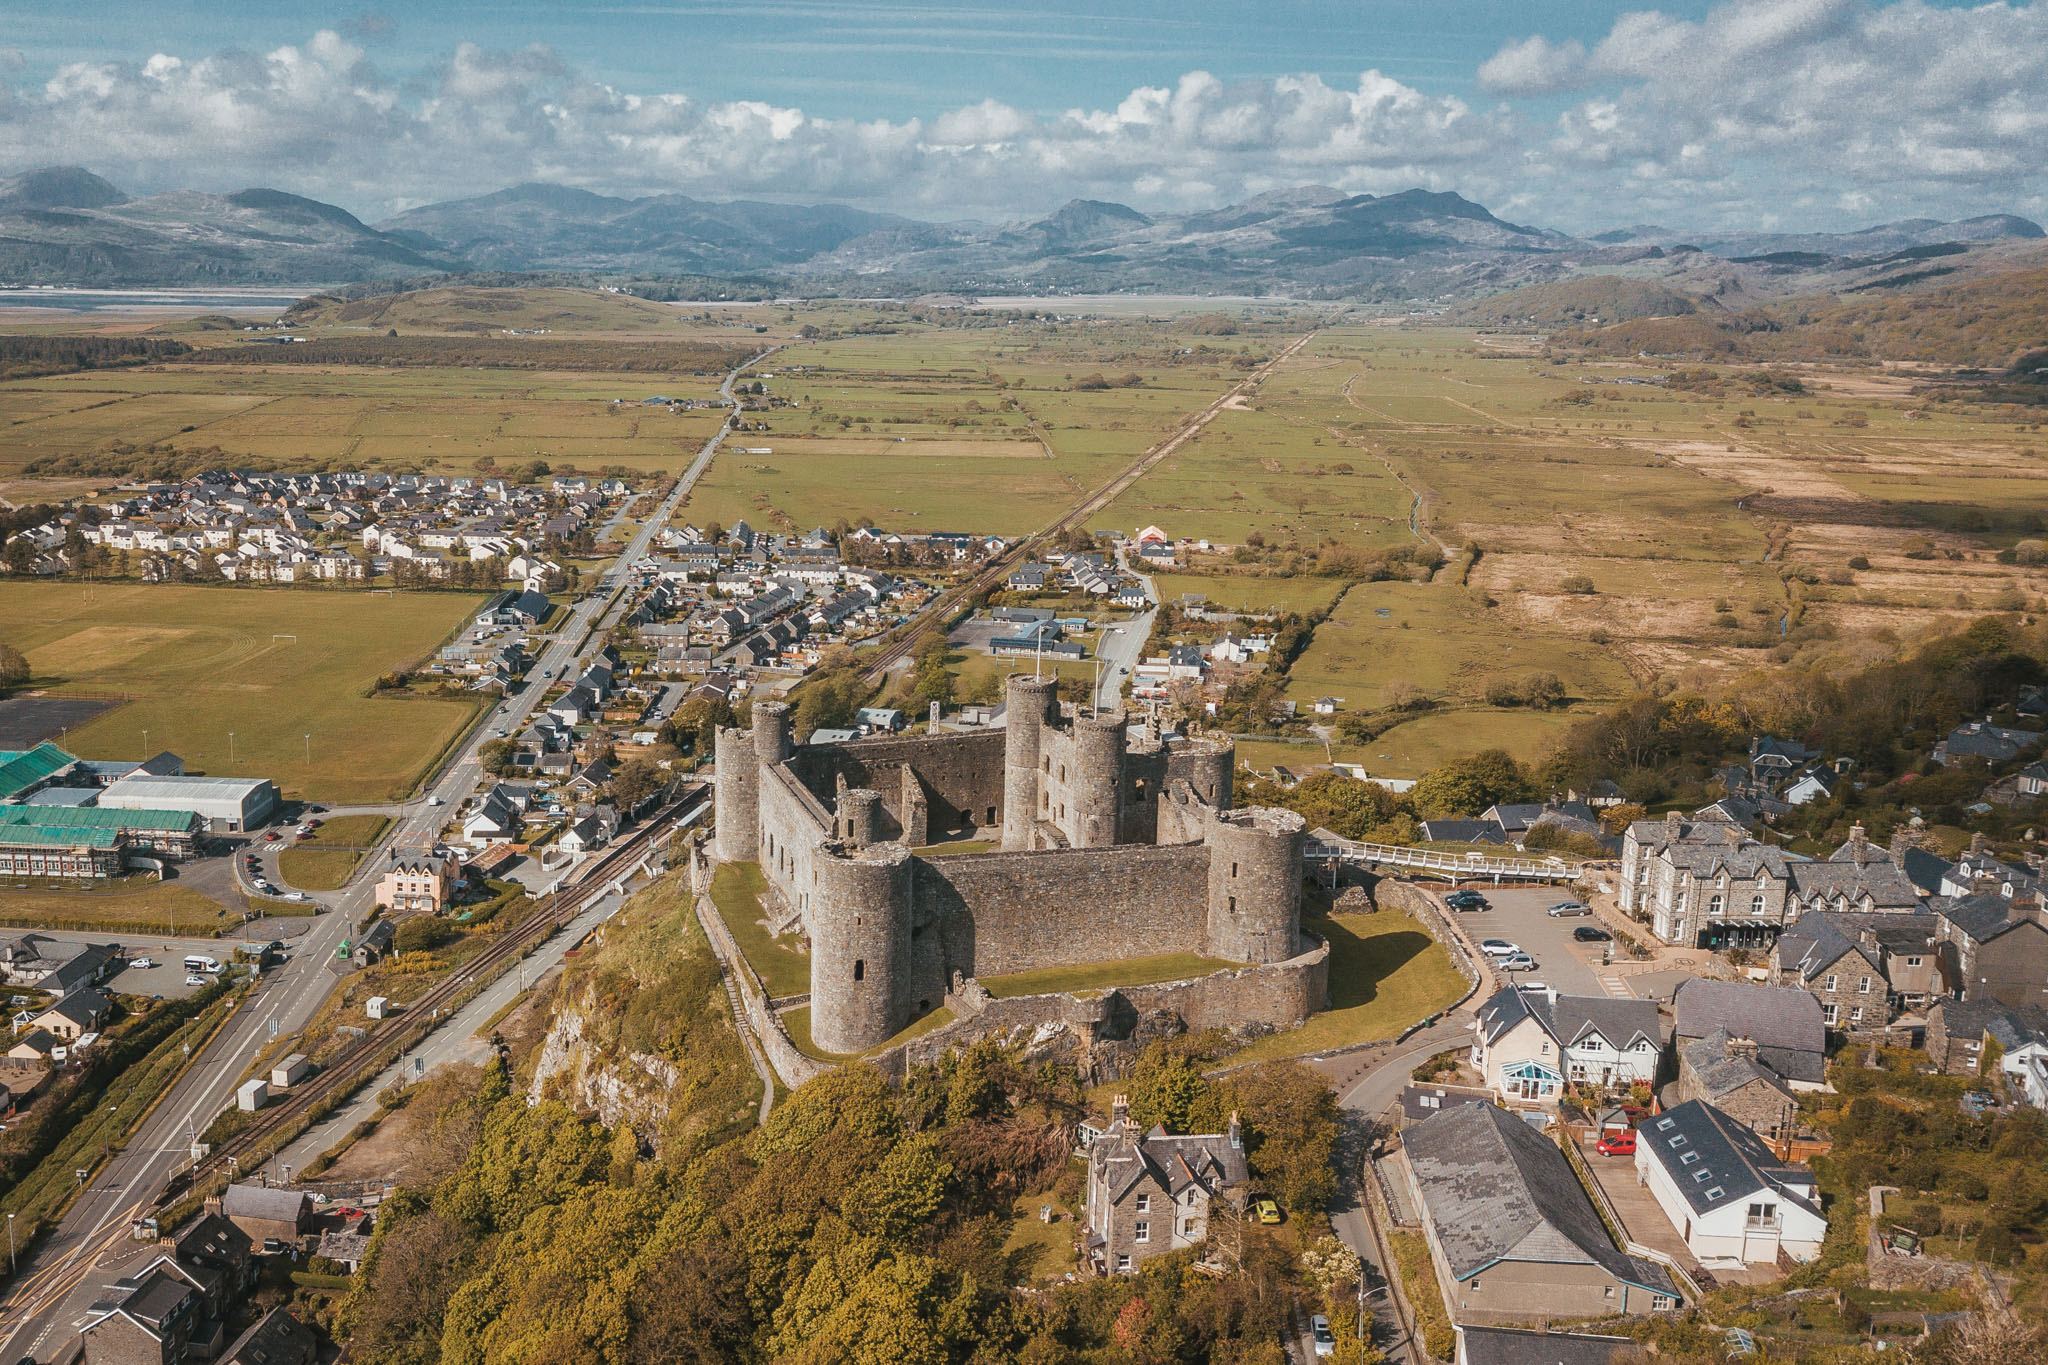 Harlech Castle by drone // The Most Beautiful Places to Visit in Wales // #readysetjetset #wales #uk #welsh #travel #photospots #blogpost